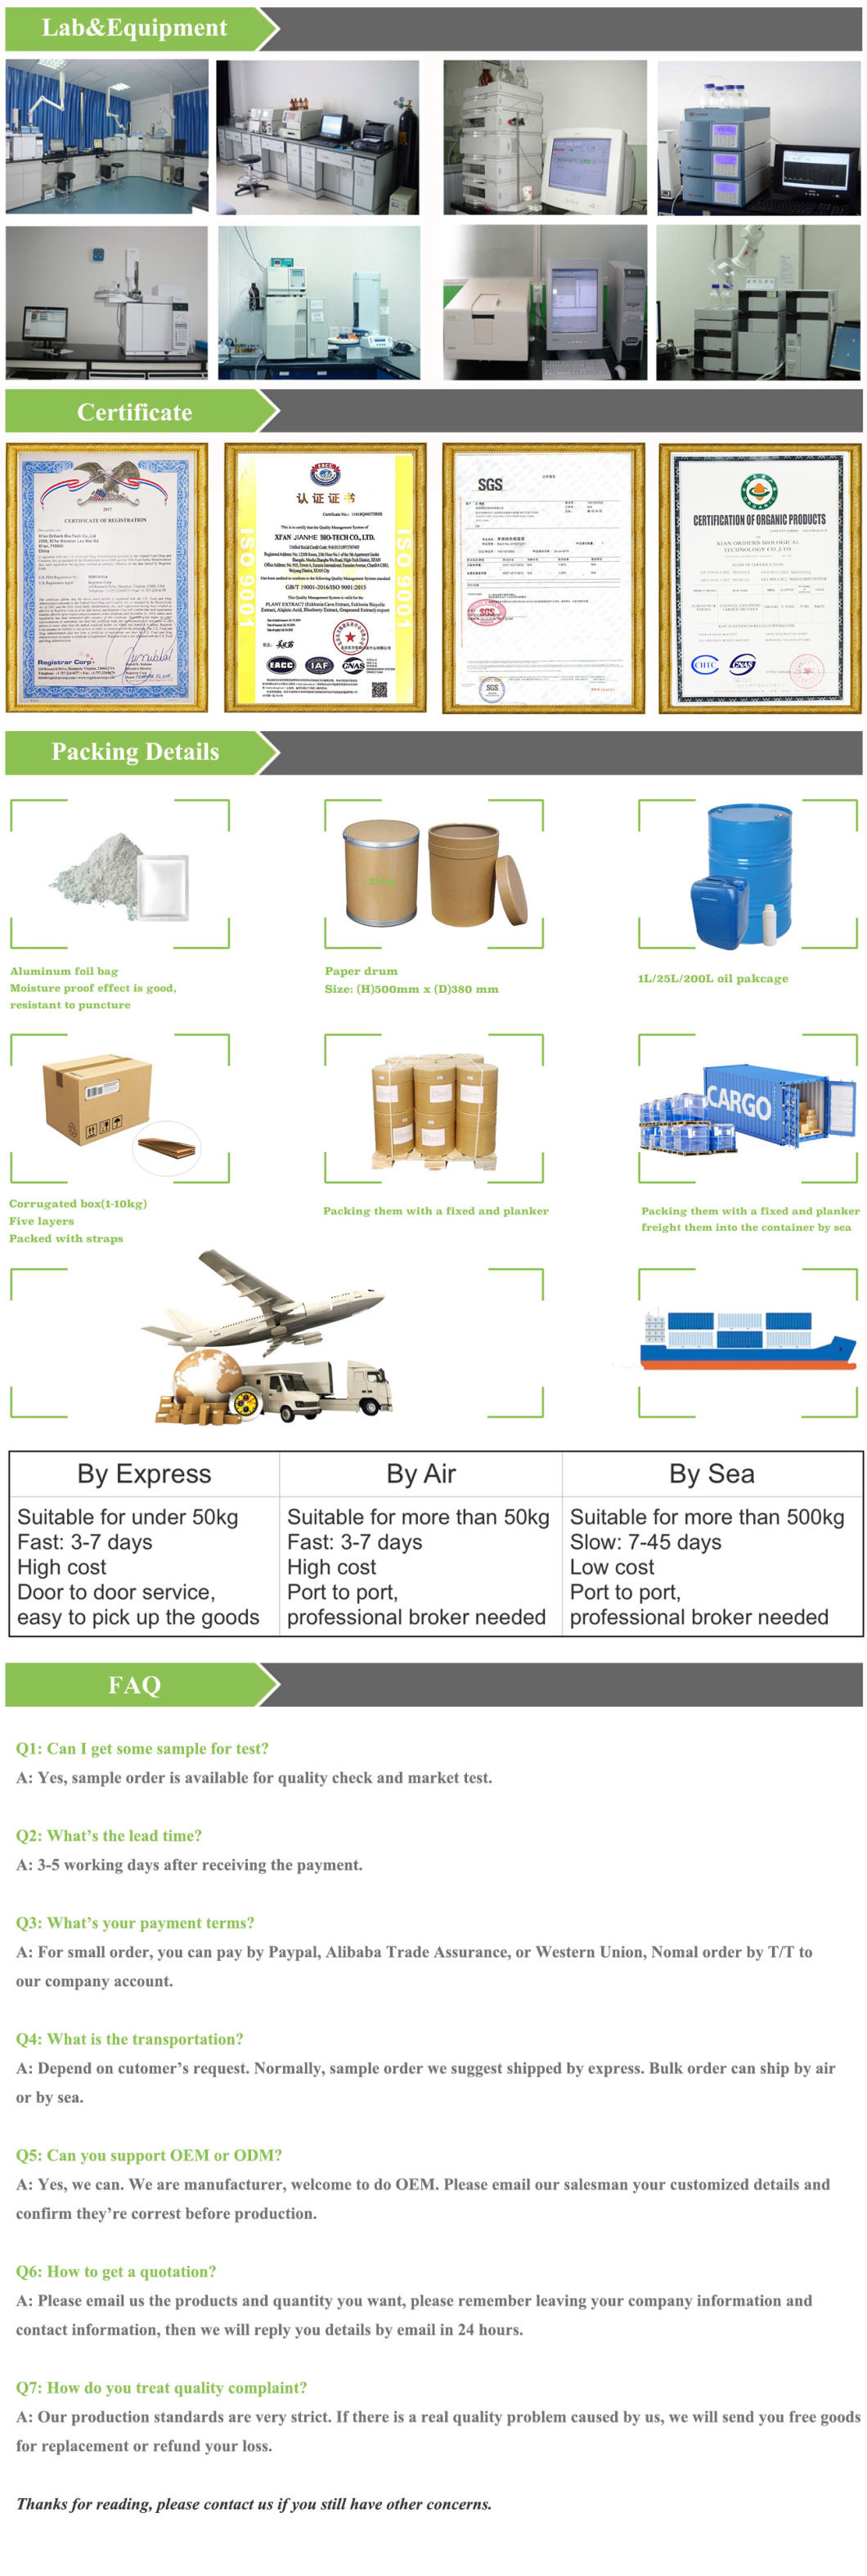 China Wholesale Factory Supply for Pharmaceutical products,Chemicals, Pharmaceutical Package group in China.